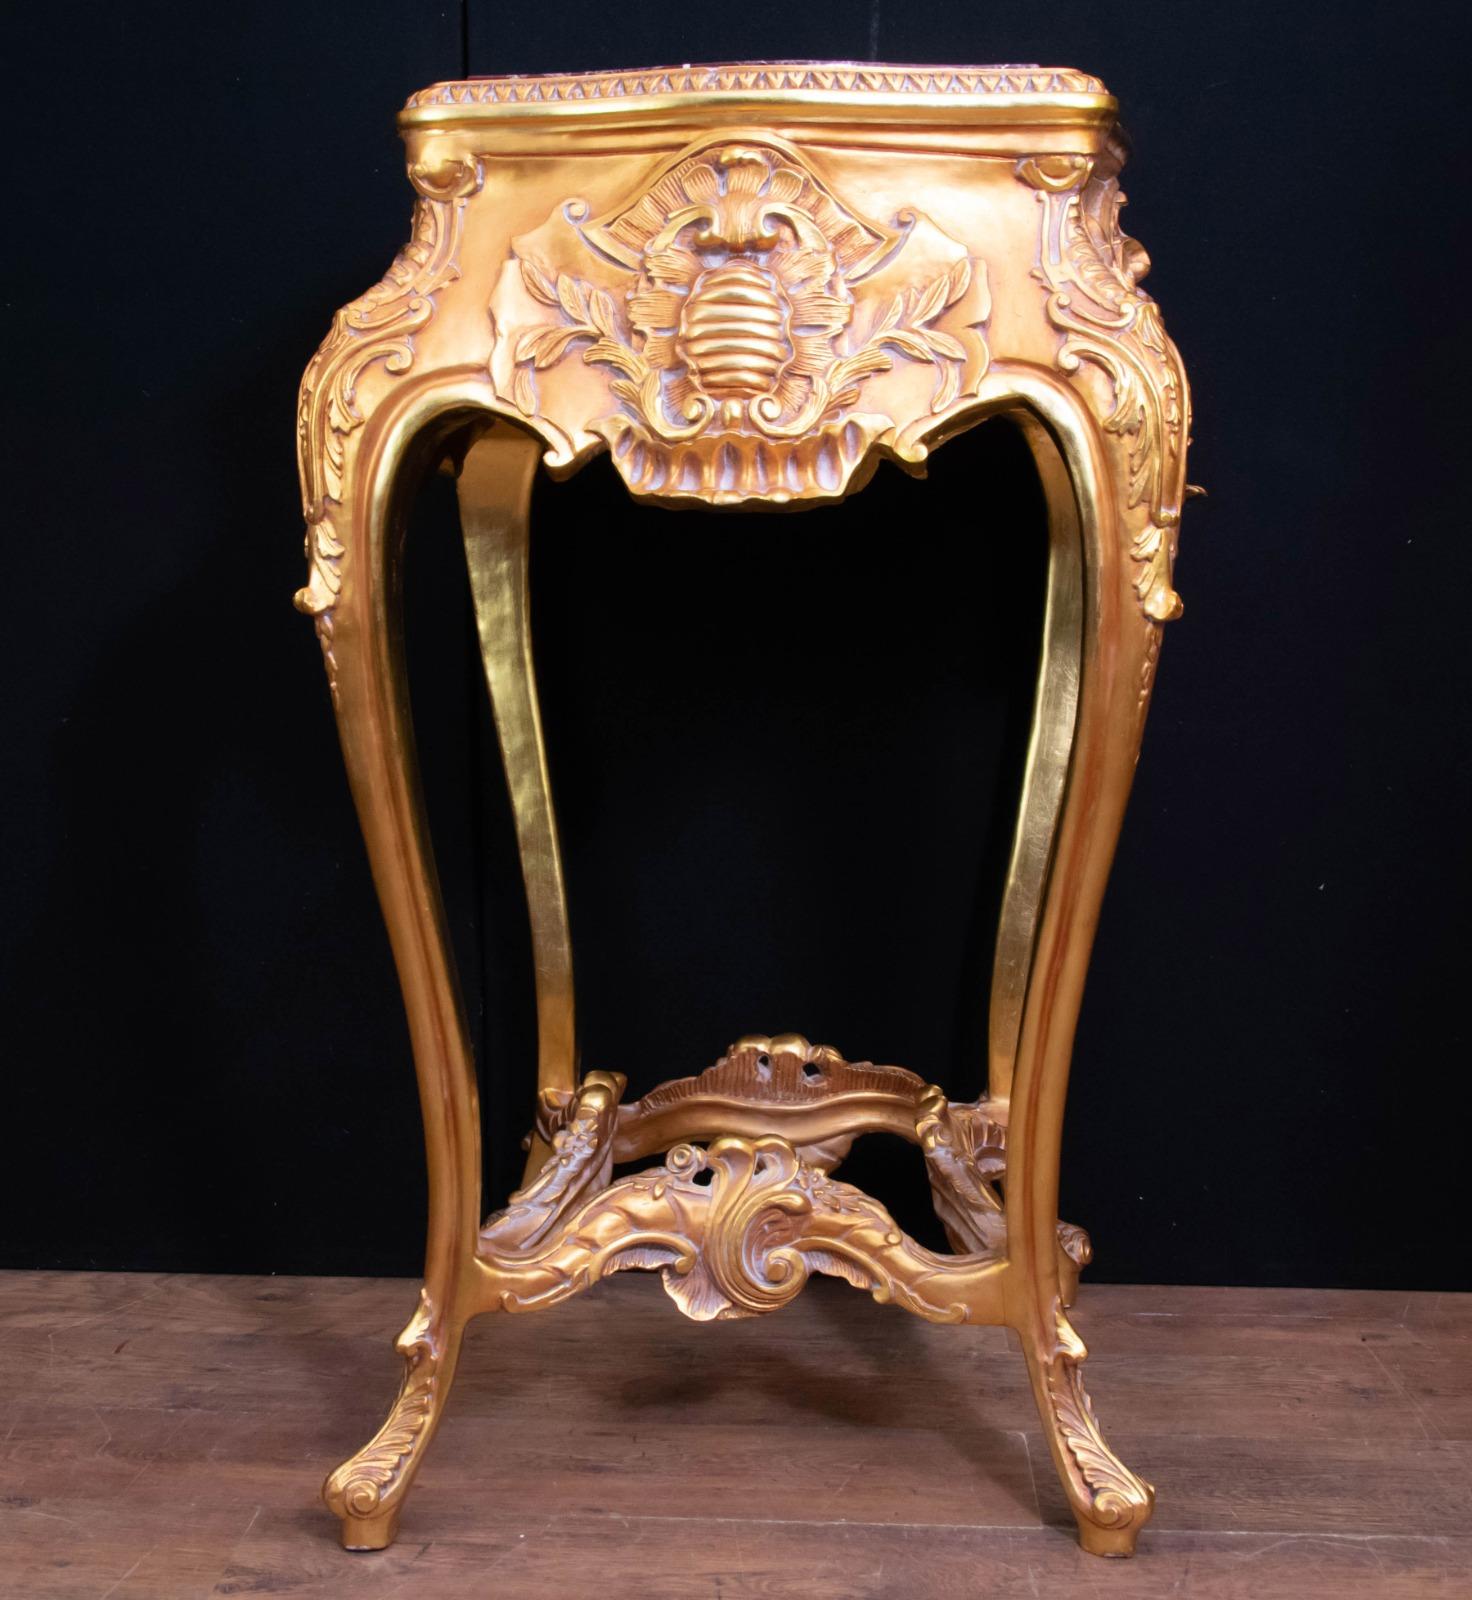 - Charming pair of Italian rococo gilt pedestal table / stands
- Over four feet tall so good size, perfect for displaying busts and vases
- Intricately hand carved with marble tops
- Offered in great shape ready for home use right away 
- We